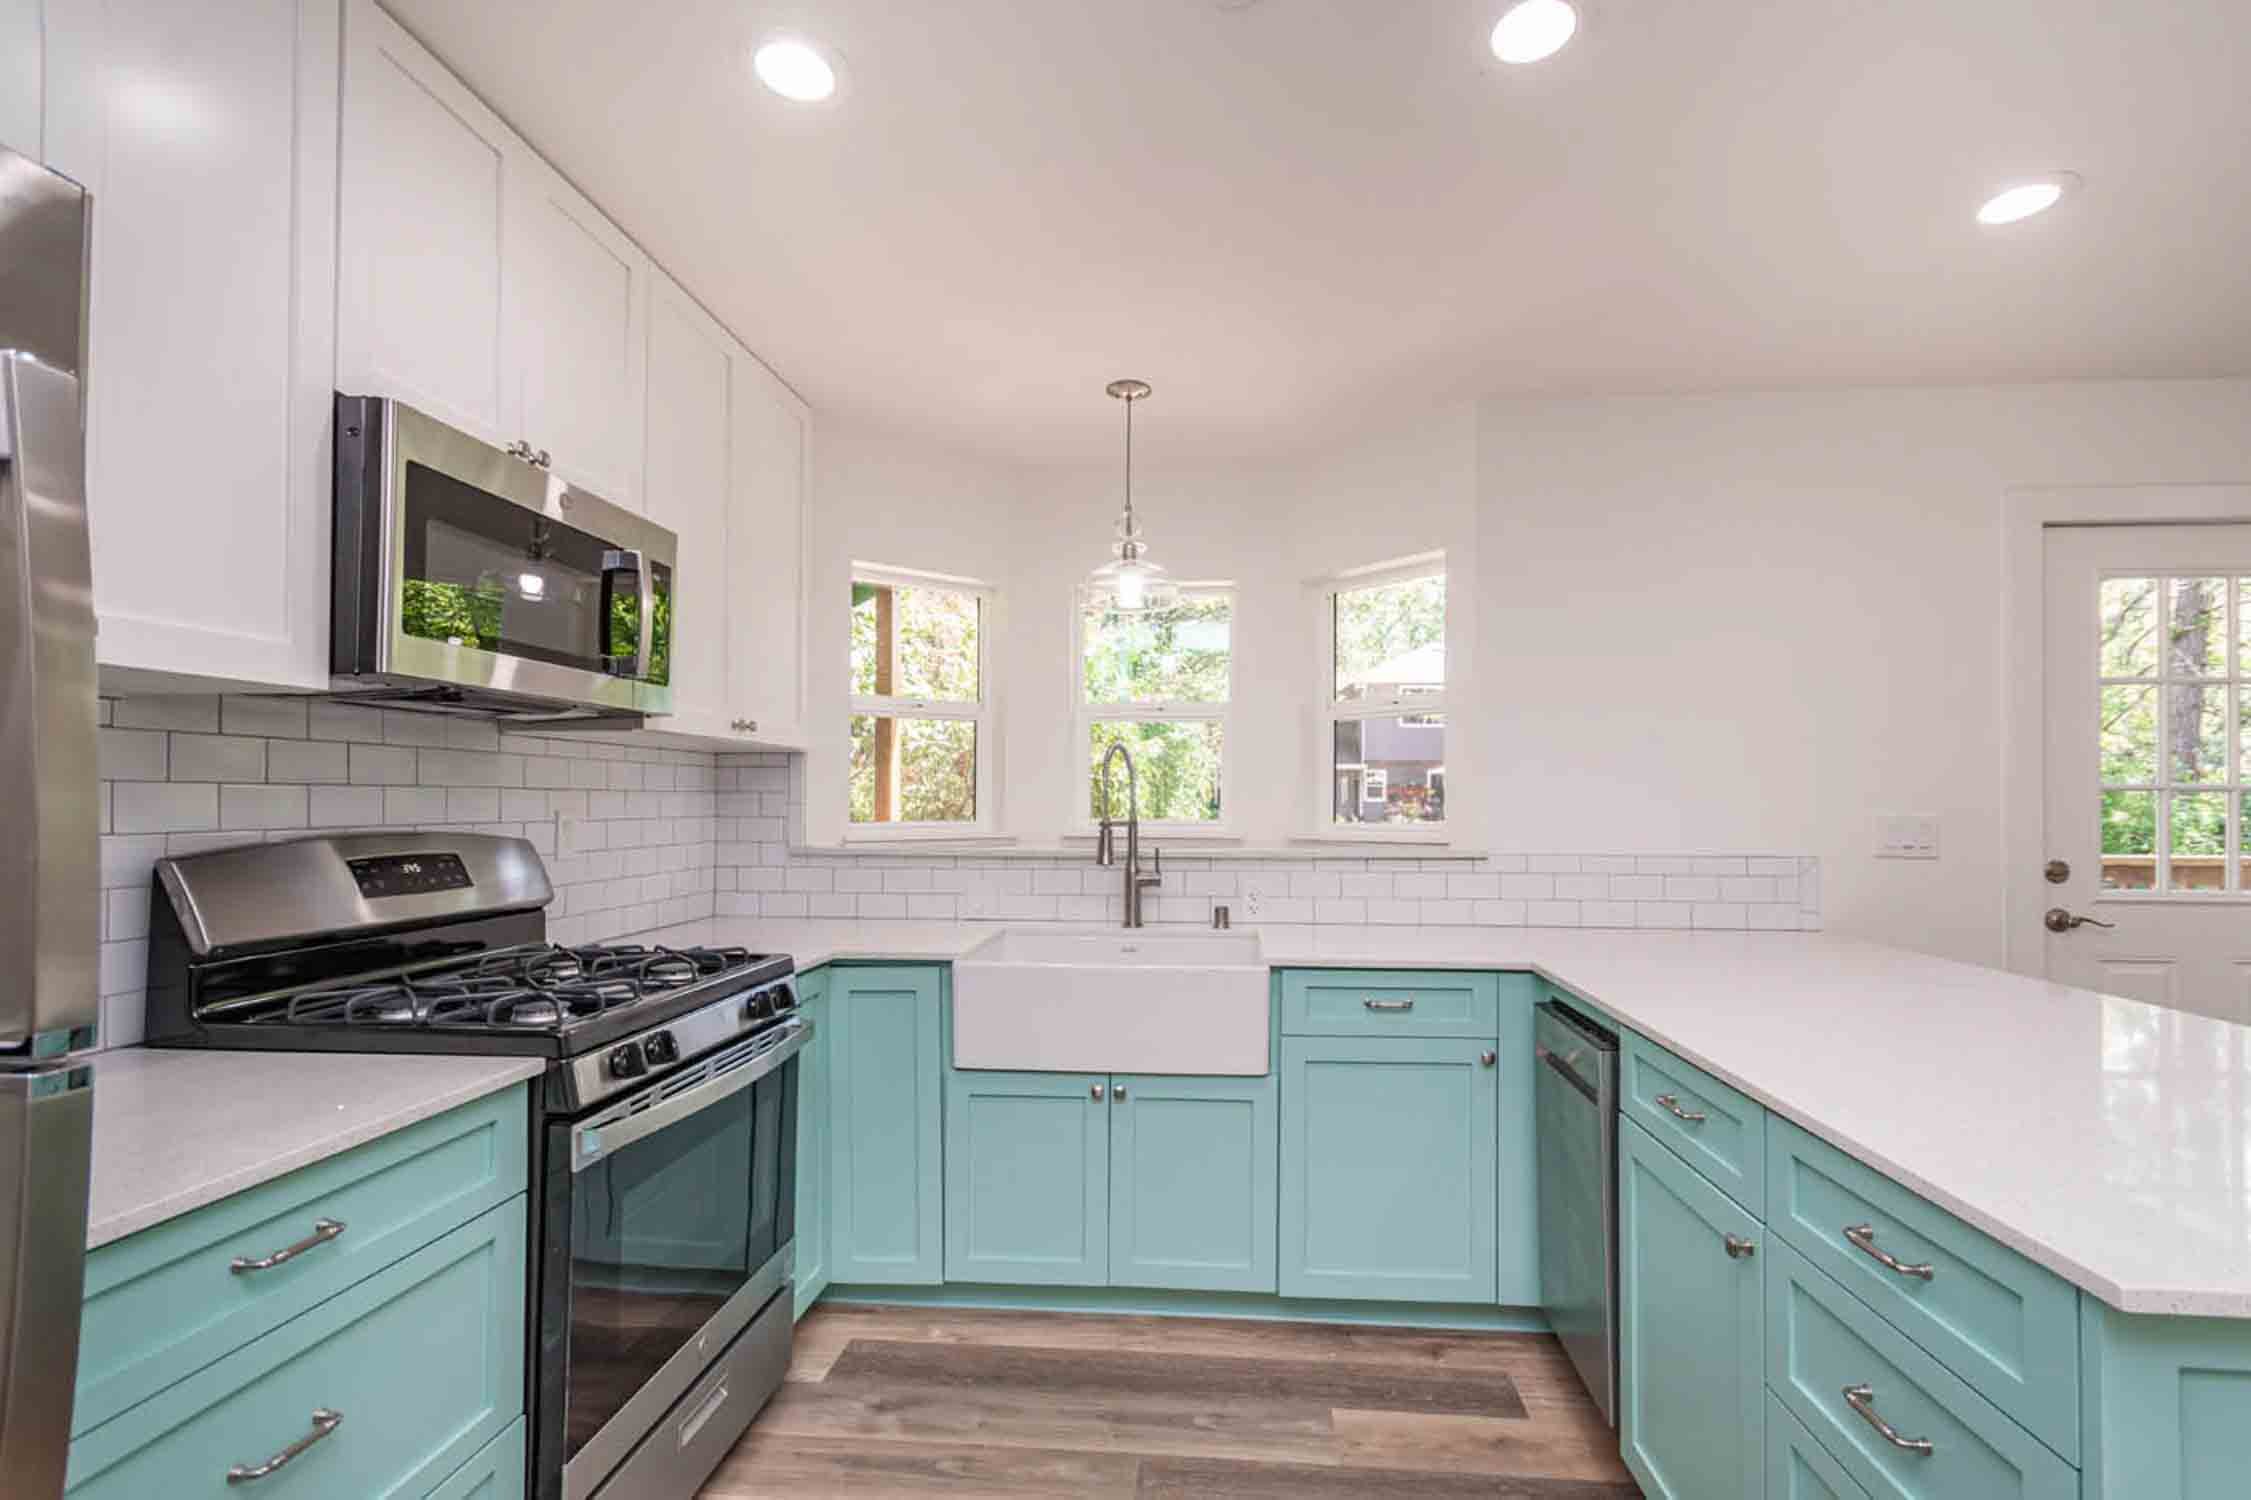 San Jose tiny house companies and their project of a mint green kitchen in a home.